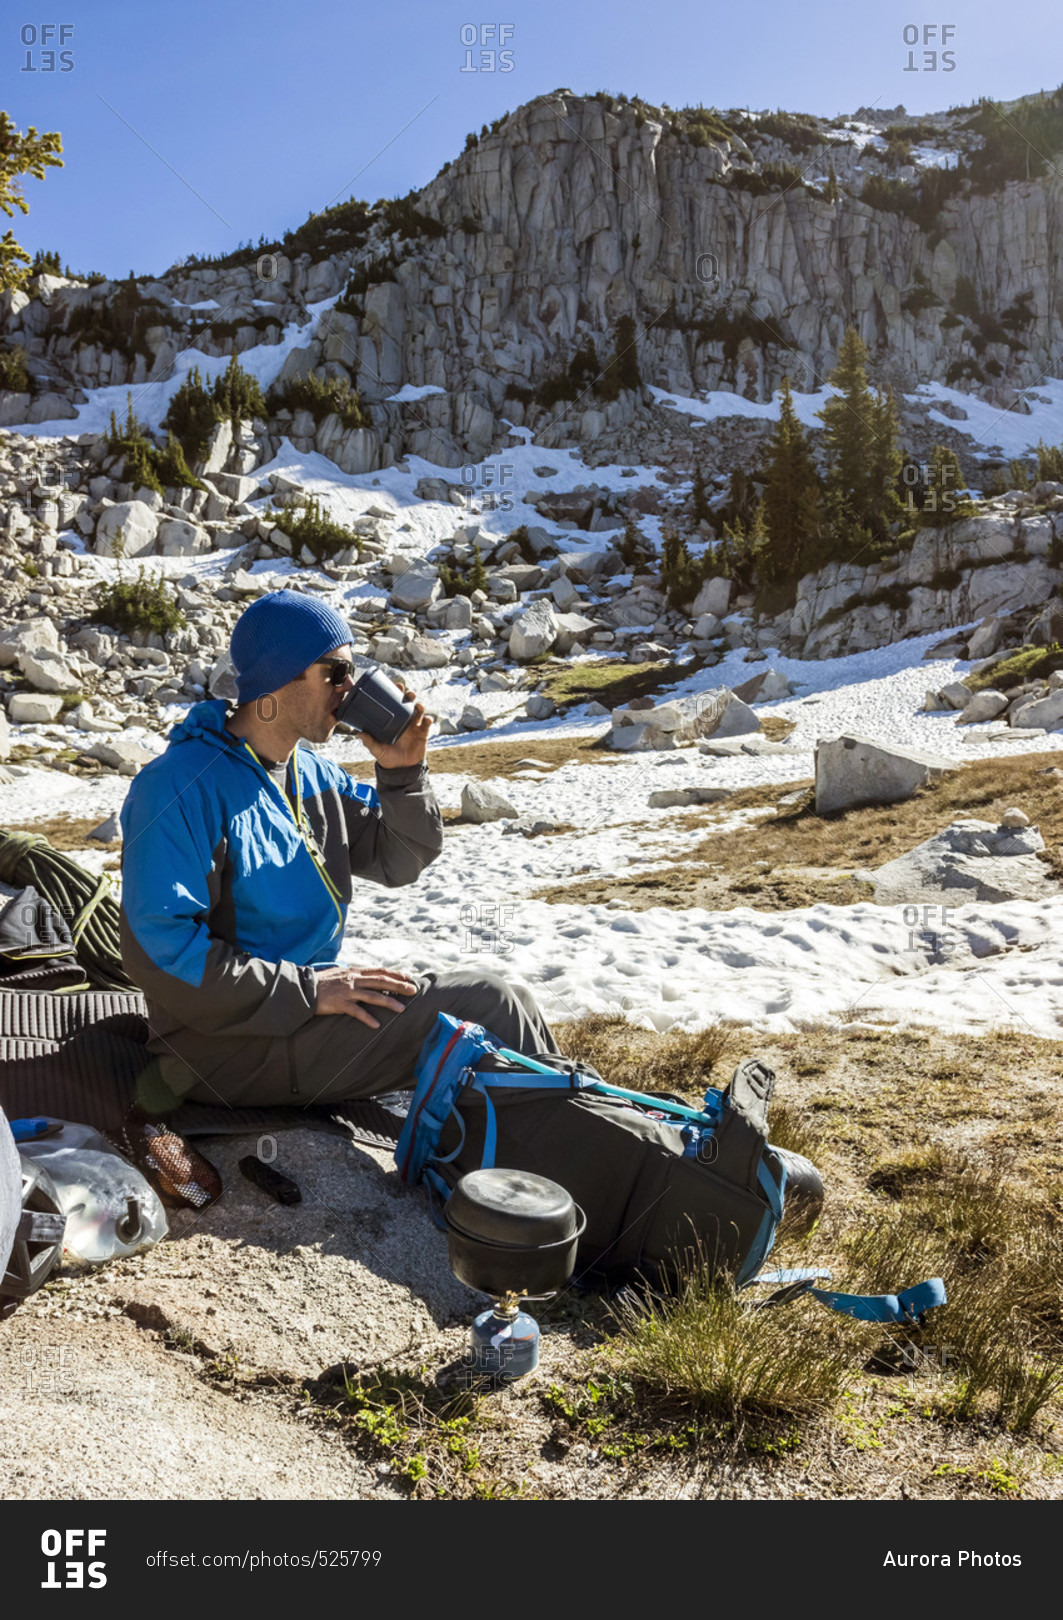 A Man Cooks Breakfast And Enjoys His Coffee While Camping In The Lone Peak Wilderness In Utah's Wasatch Mountains